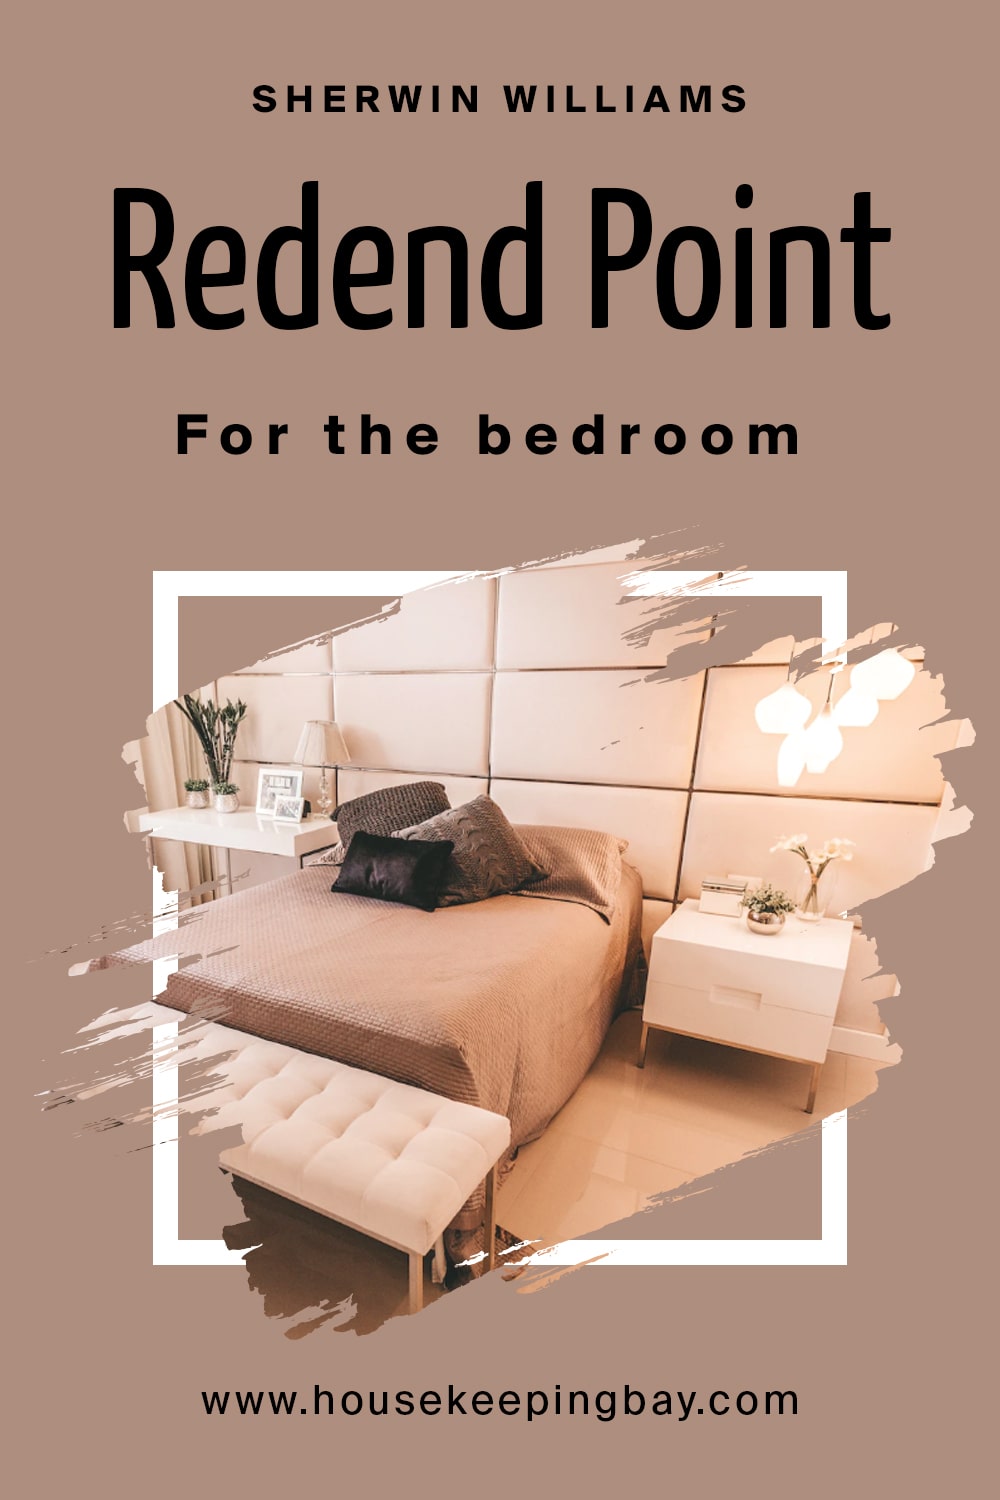 Sherwin Williams. Redend Point For the bedroom